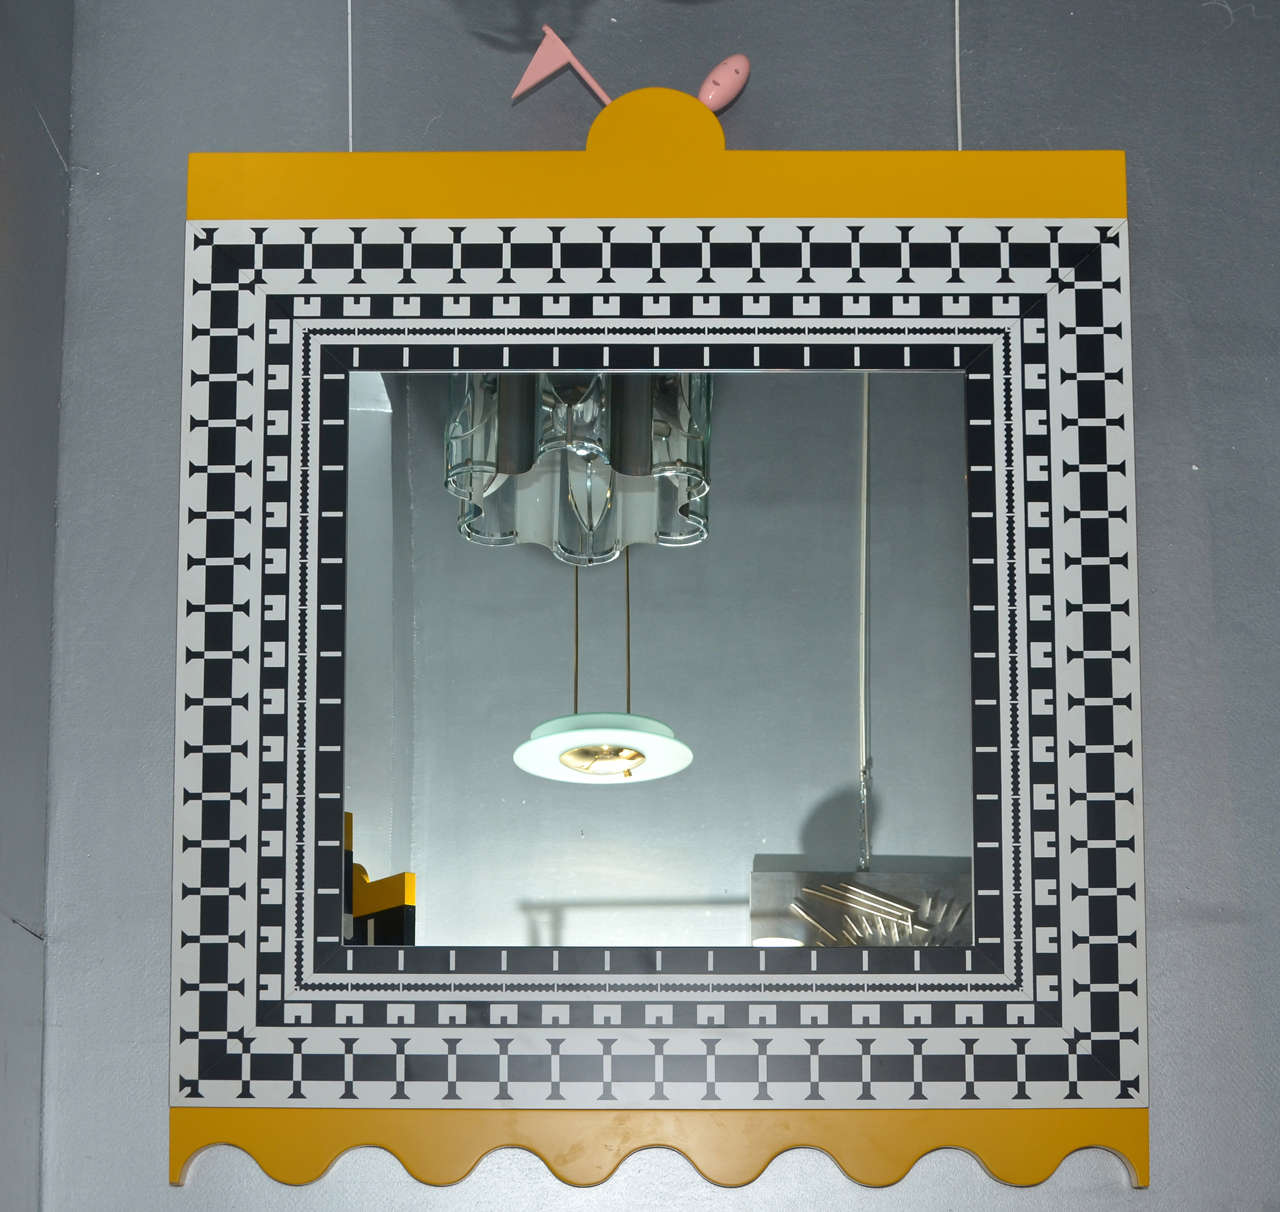 1988 mirror by Alessandro Mendini and Alessandro Guerriero of the collection Ollo, edited by Alchimia. with a frame in yellow melamine decorated with black and white motifs; top-level has a pink wooden flag and a small head.